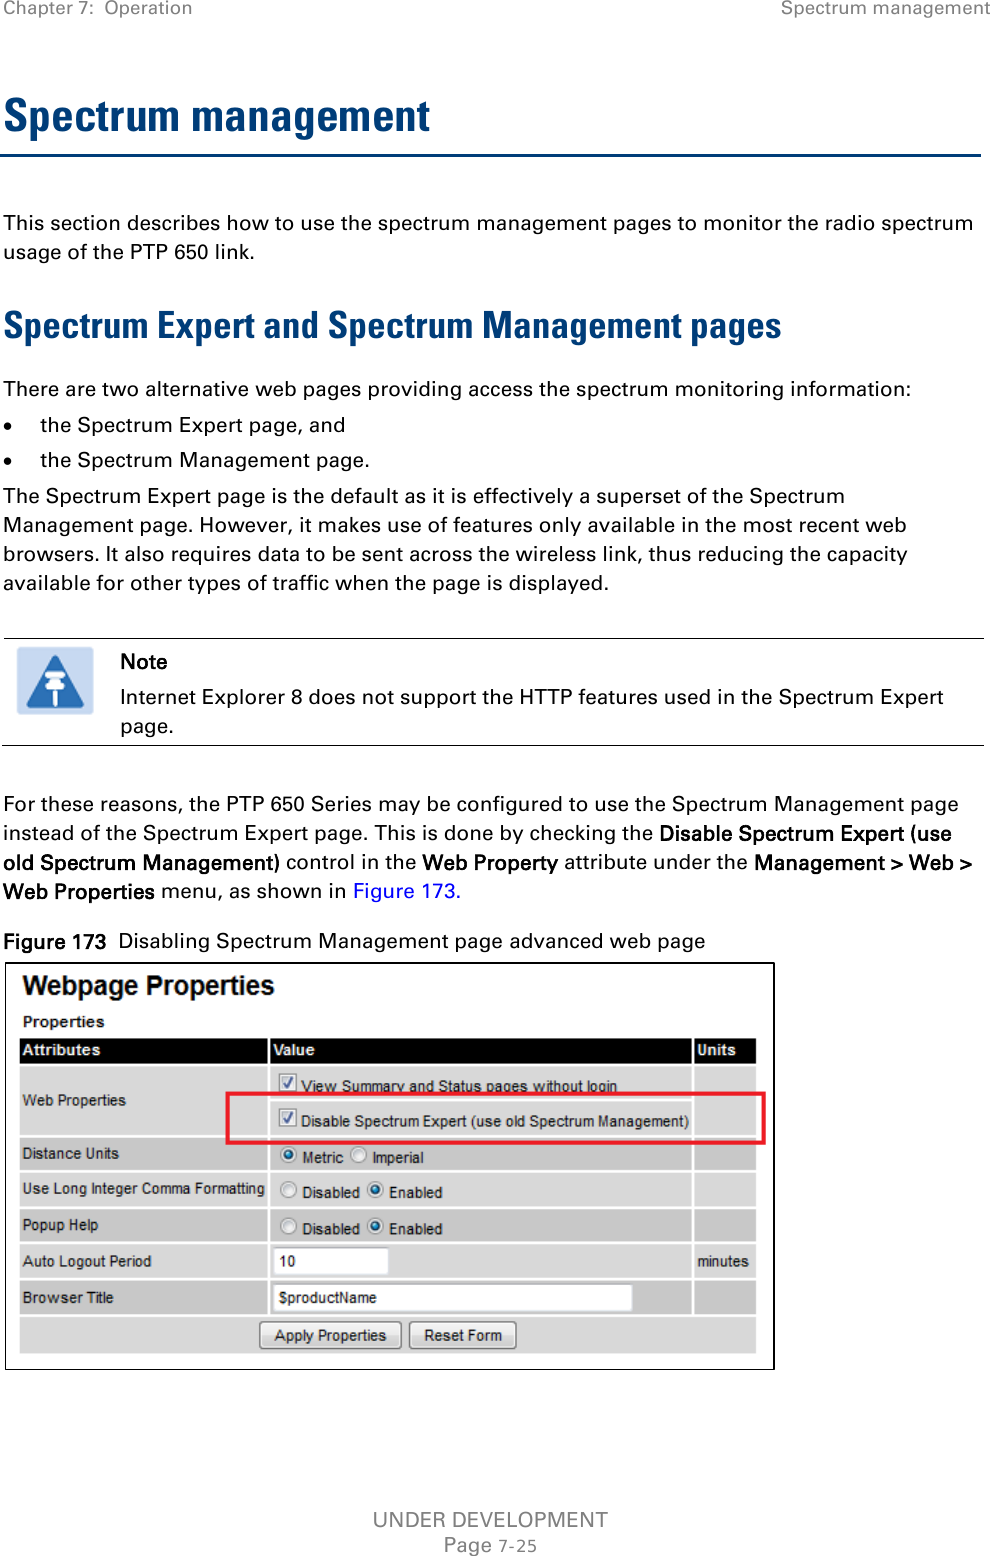 Chapter 7:  Operation Spectrum management  Spectrum management This section describes how to use the spectrum management pages to monitor the radio spectrum usage of the PTP 650 link. Spectrum Expert and Spectrum Management pages There are two alternative web pages providing access the spectrum monitoring information: • the Spectrum Expert page, and • the Spectrum Management page. The Spectrum Expert page is the default as it is effectively a superset of the Spectrum Management page. However, it makes use of features only available in the most recent web browsers. It also requires data to be sent across the wireless link, thus reducing the capacity available for other types of traffic when the page is displayed.   Note Internet Explorer 8 does not support the HTTP features used in the Spectrum Expert page.  For these reasons, the PTP 650 Series may be configured to use the Spectrum Management page instead of the Spectrum Expert page. This is done by checking the Disable Spectrum Expert (use old Spectrum Management) control in the Web Property attribute under the Management &gt; Web &gt; Web Properties menu, as shown in Figure 173. Figure 173  Disabling Spectrum Management page advanced web page   UNDER DEVELOPMENT Page 7-25 